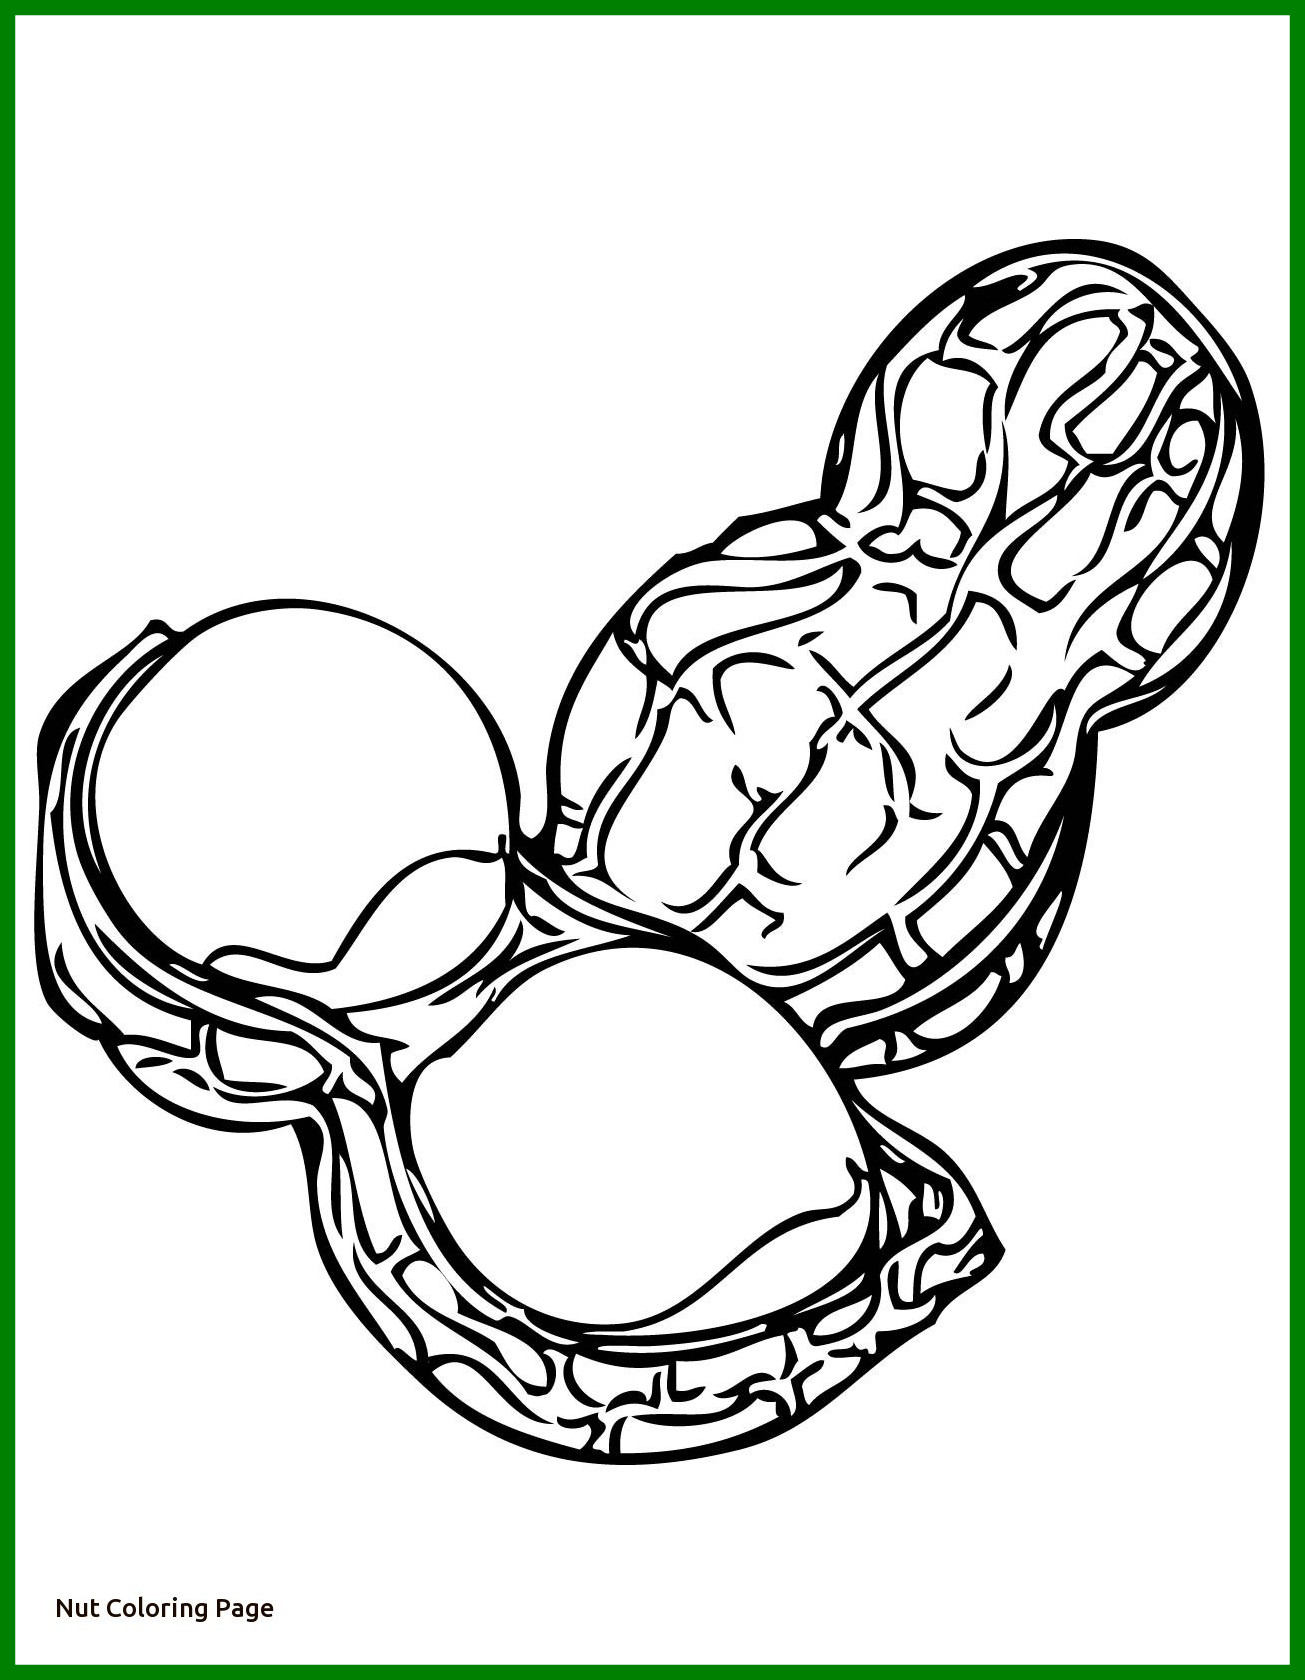 coloring pages : Extraordinary Peanut Coloring Pages Picture Ideas Coloring  Pages‚ Printable Coloring Pages For Kids‚ Wonder Park Peanut Coloring Pages  along with coloring pagess